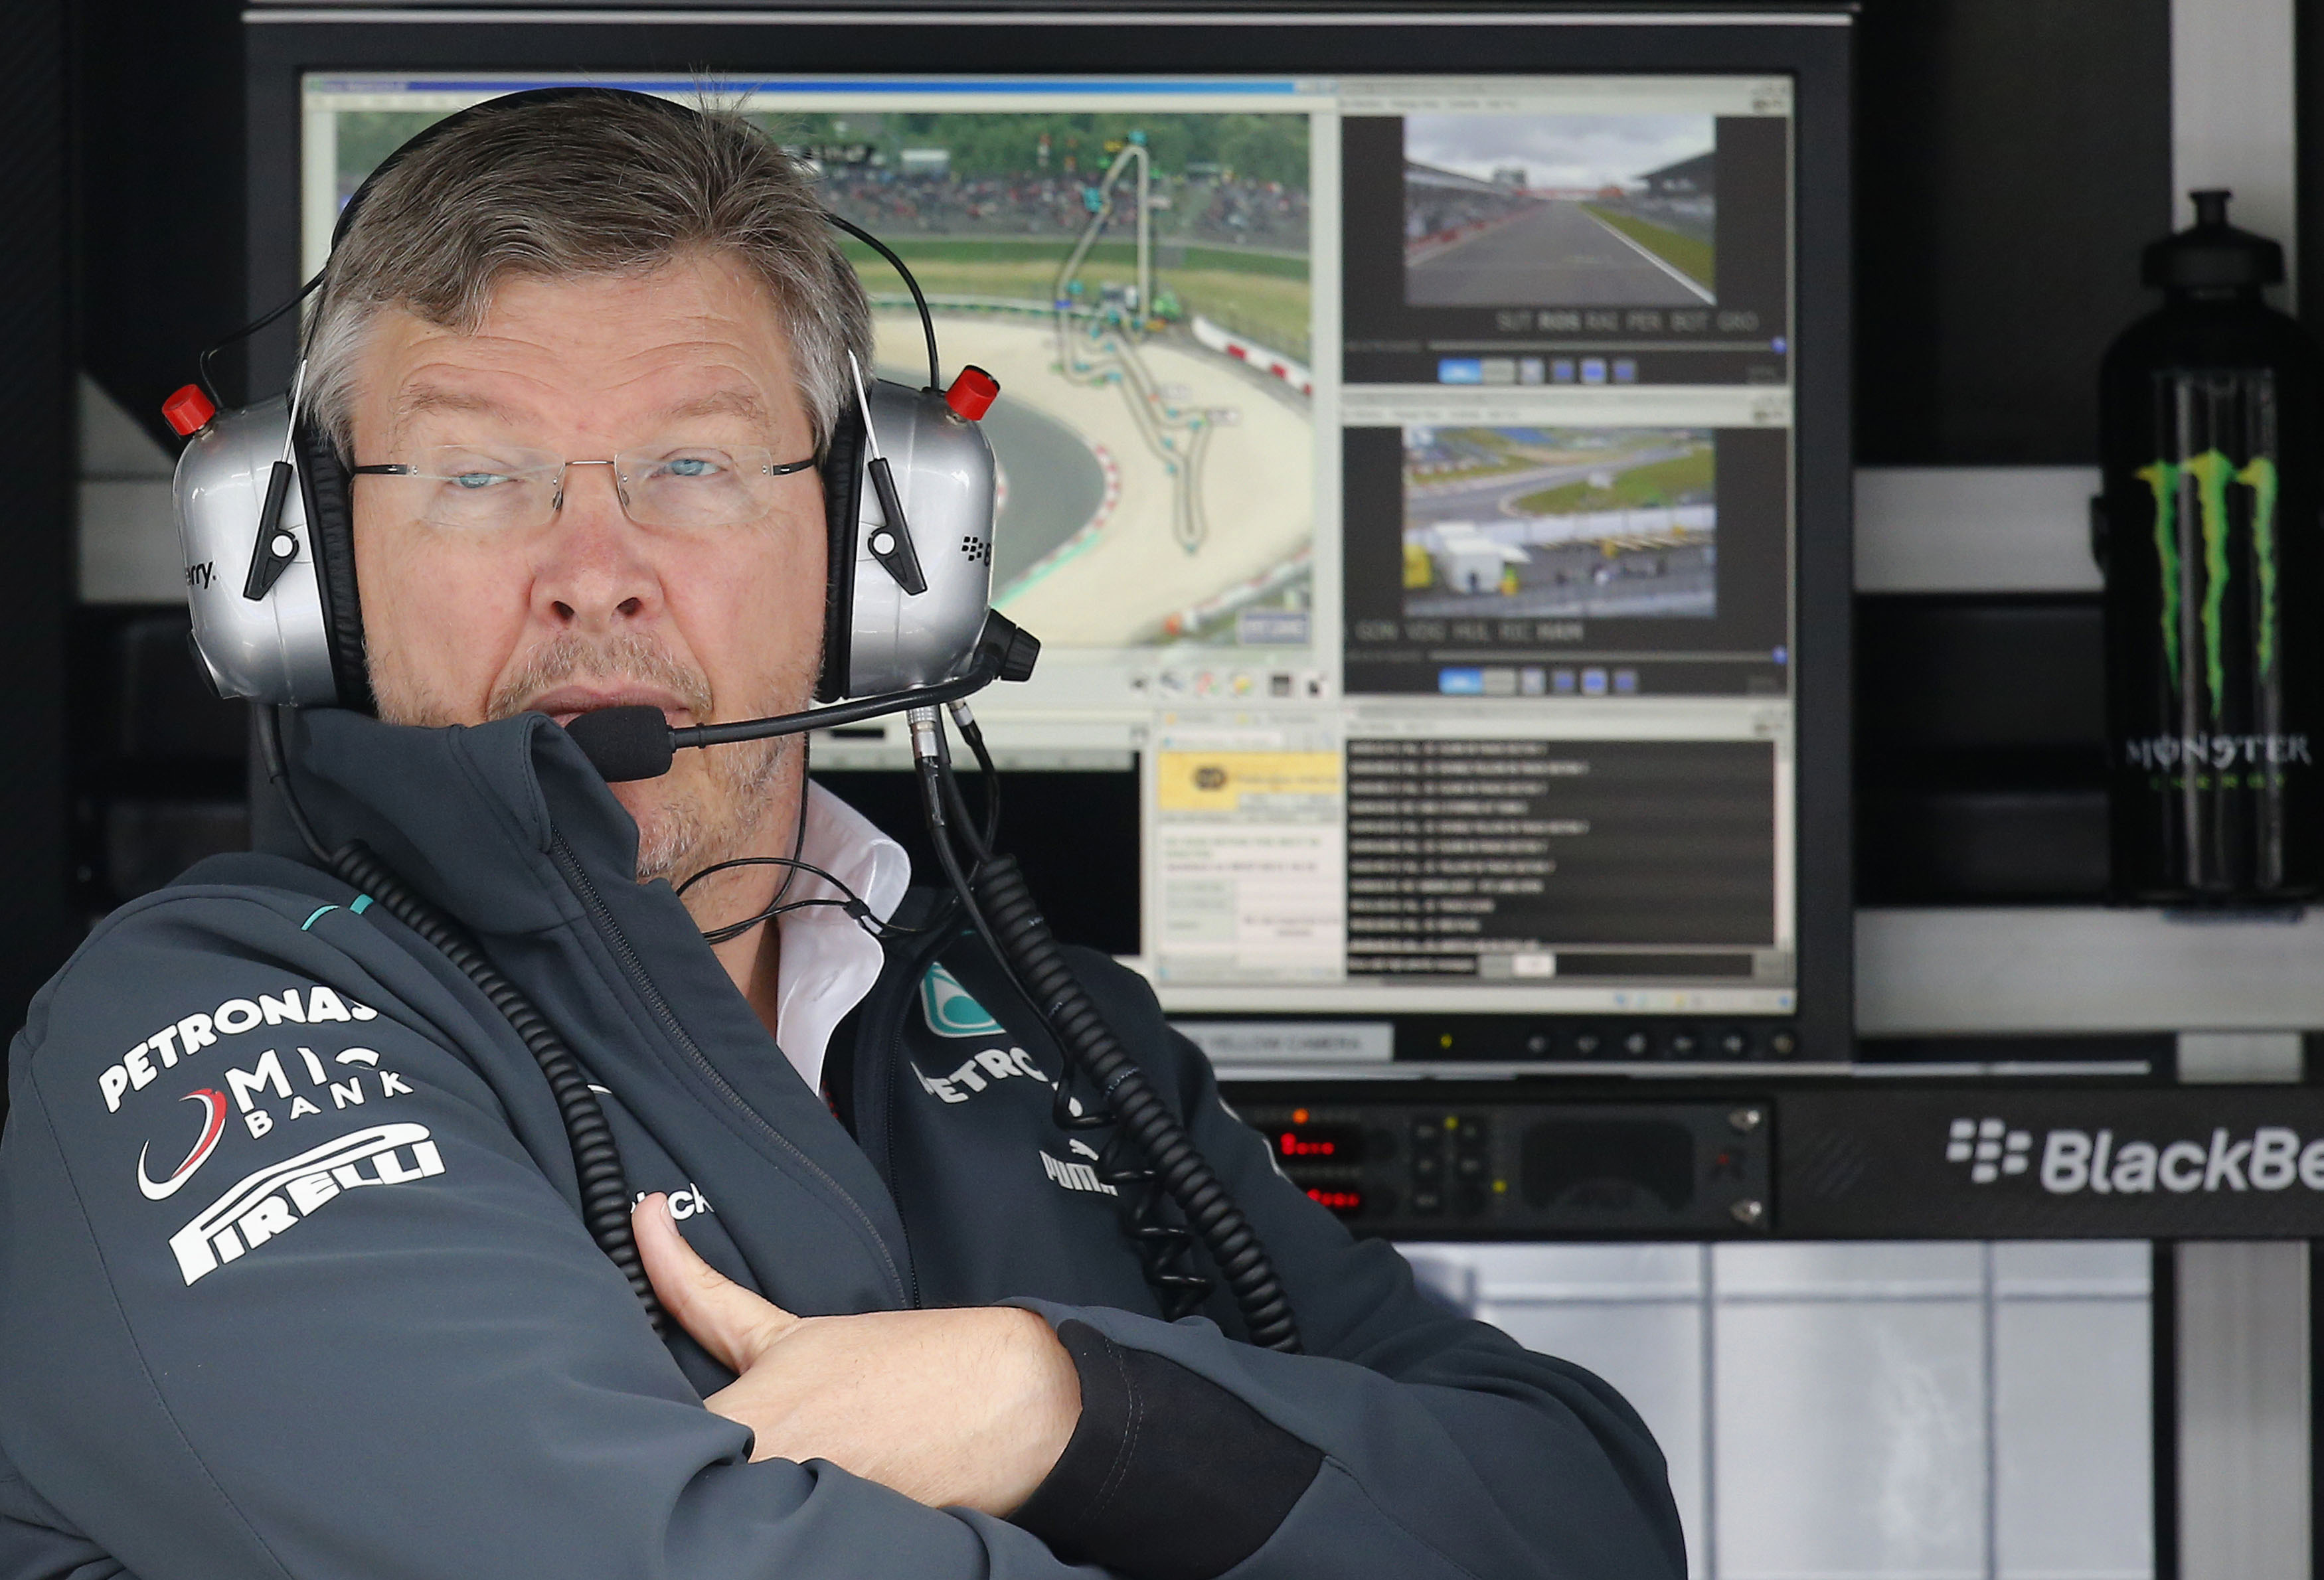 File photo of Mercedes Formula One team principal Ross Brawn looking on during the first practice session of the German F1 Grand Prix at the Nuerburgring racing circuit